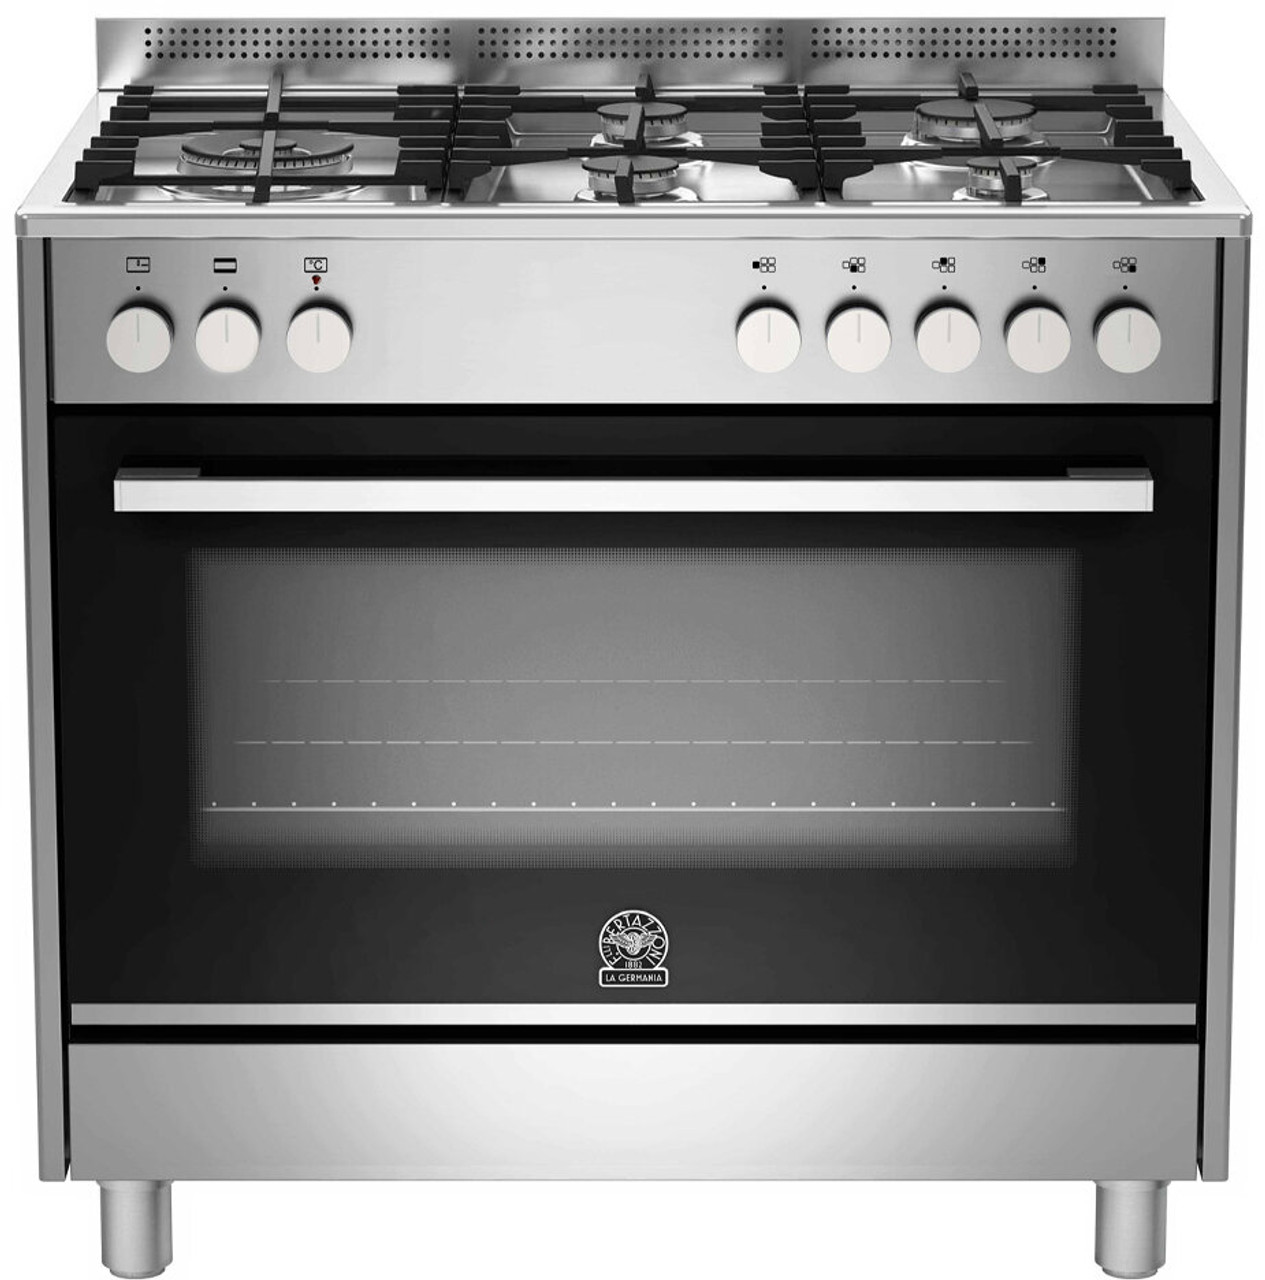 TUS95L61LDX - 90cm Futura Series Electric Freestanding Oven/Stove - Stainless Steel